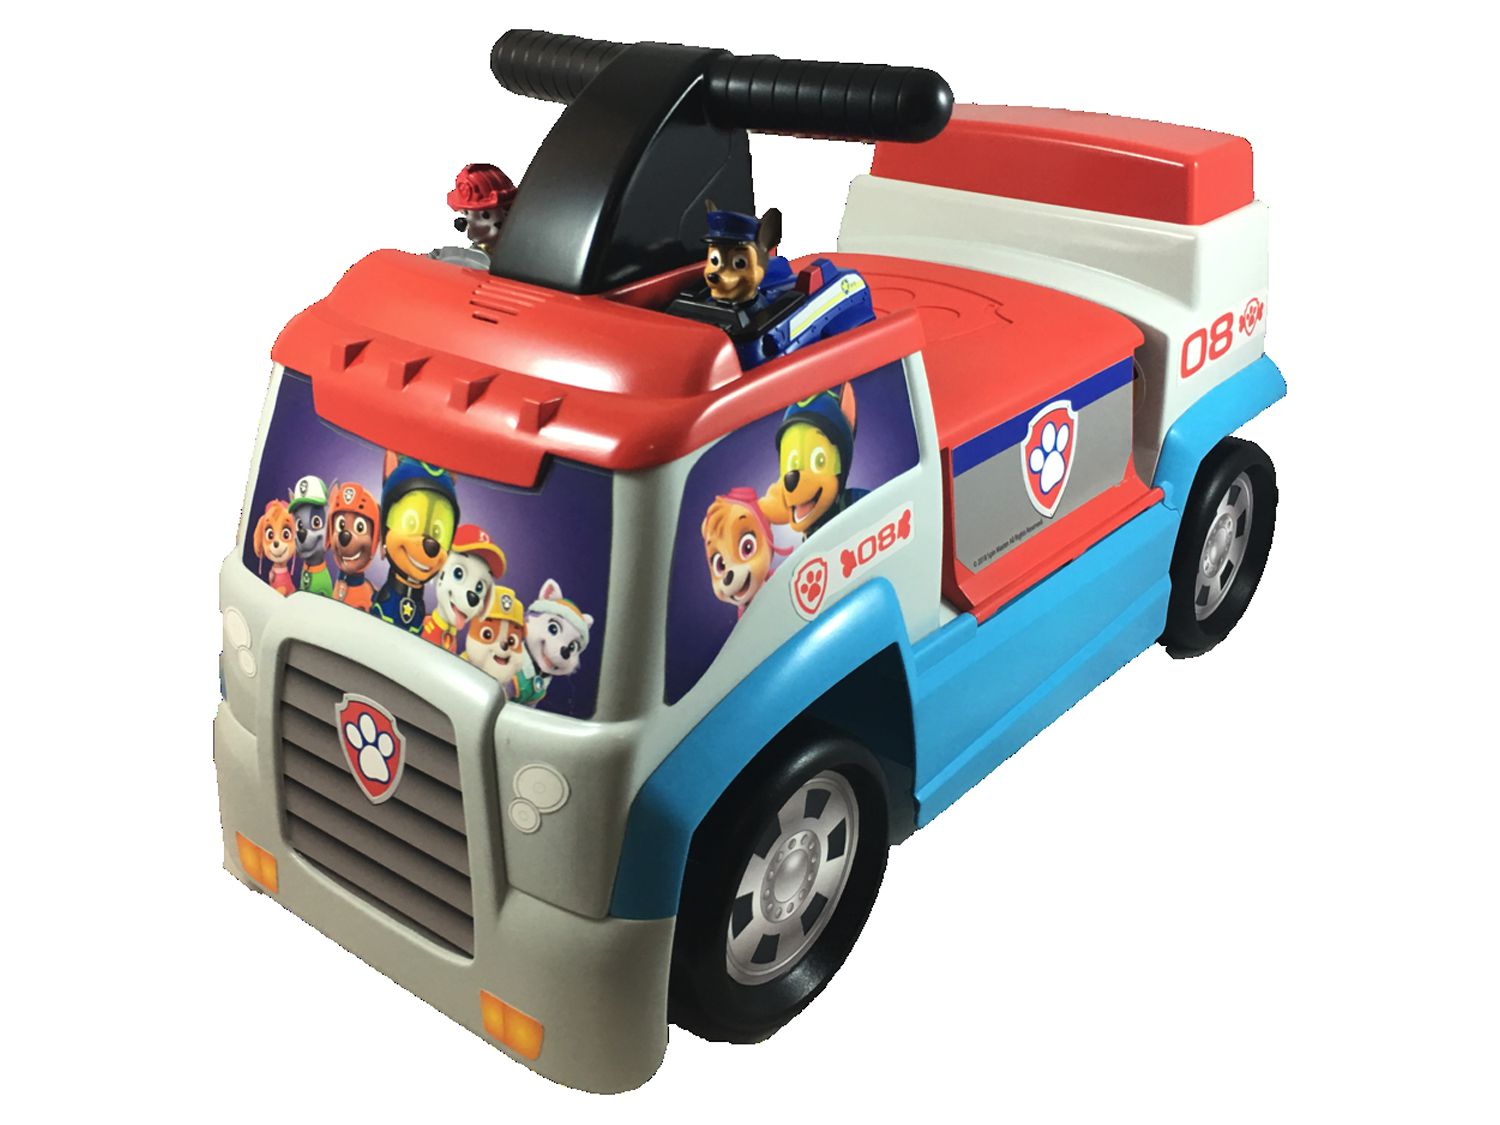 PAW Patrol Patroller Ride-On Includes Chase and Marshall Mini Vehicles - image 3 of 5